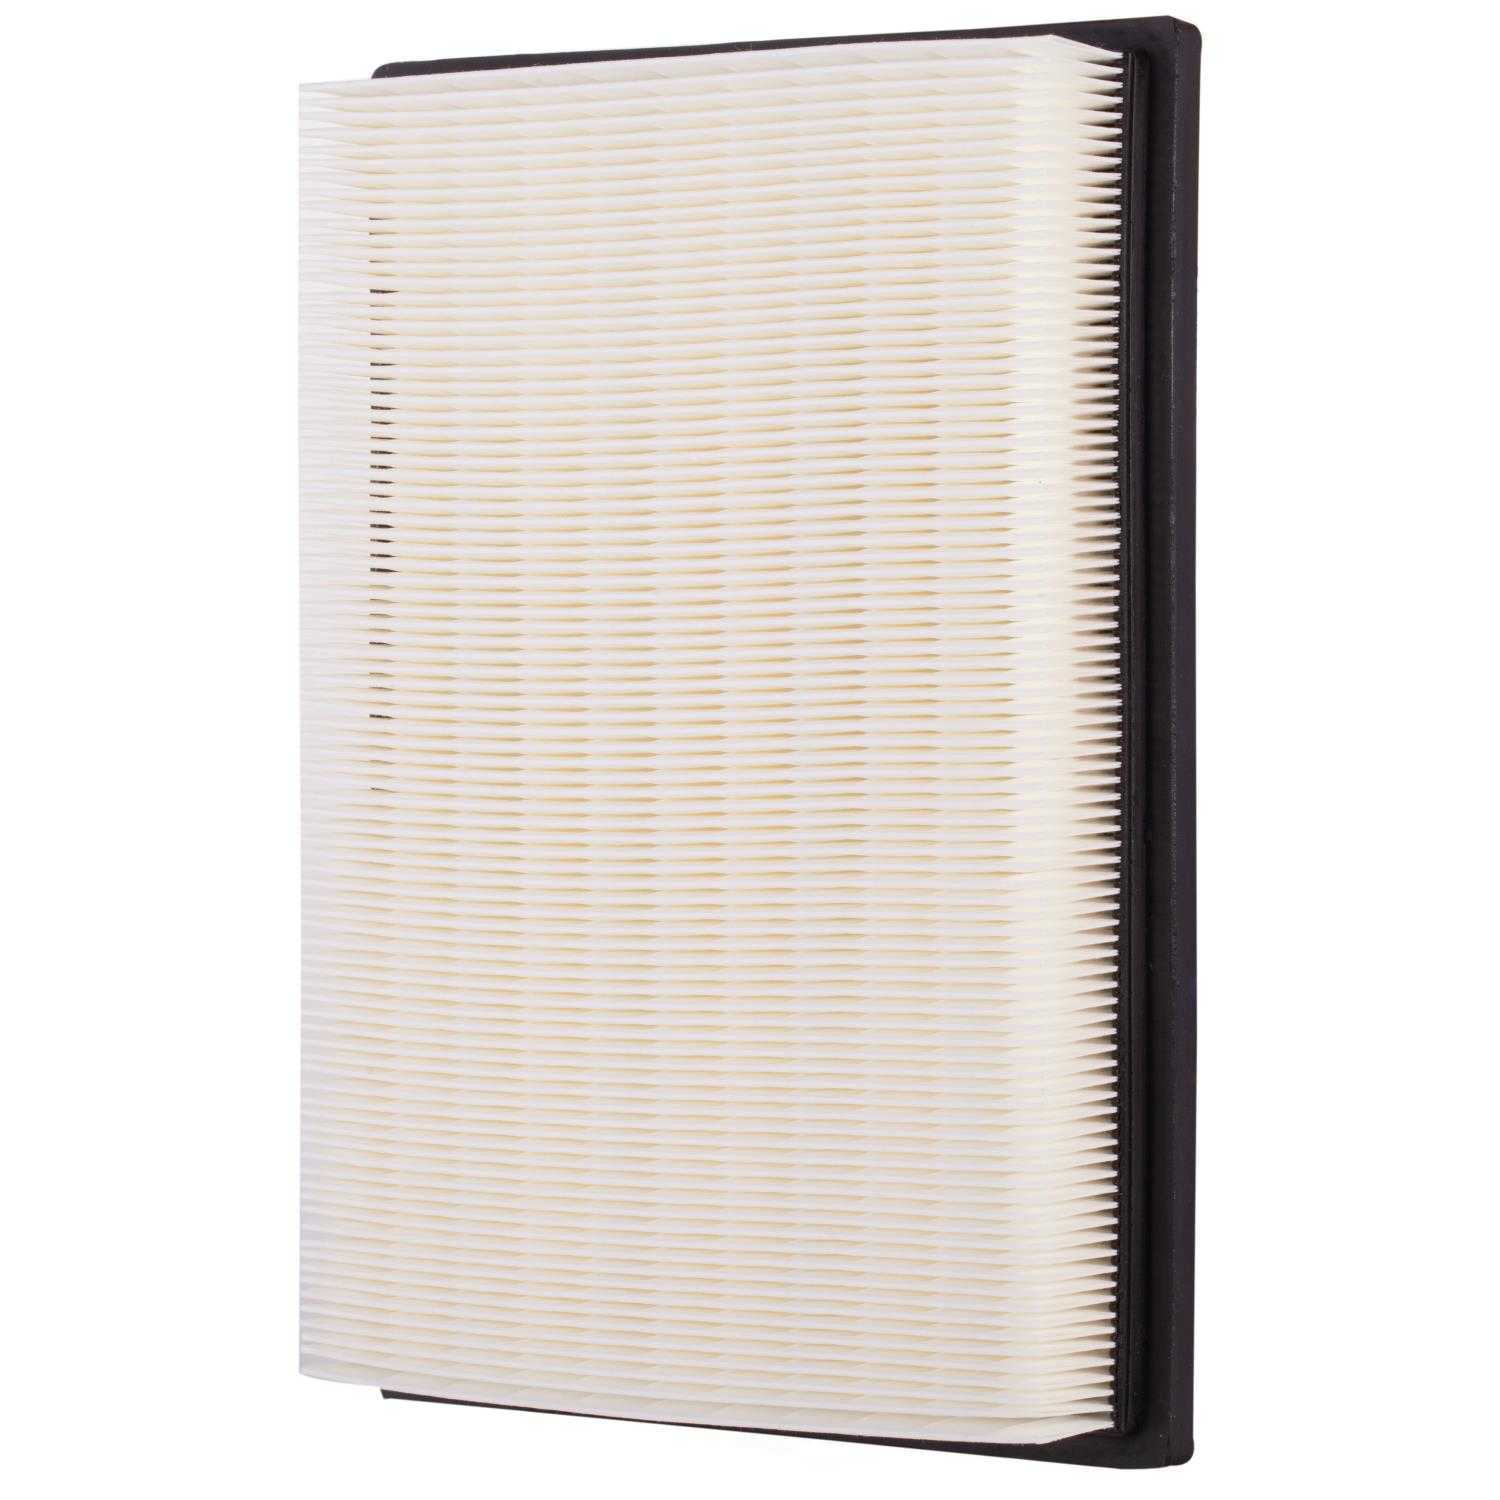 Air Filter Federated PA5372 for Chrysler PT cruiser 2001 - 2005 CA8747